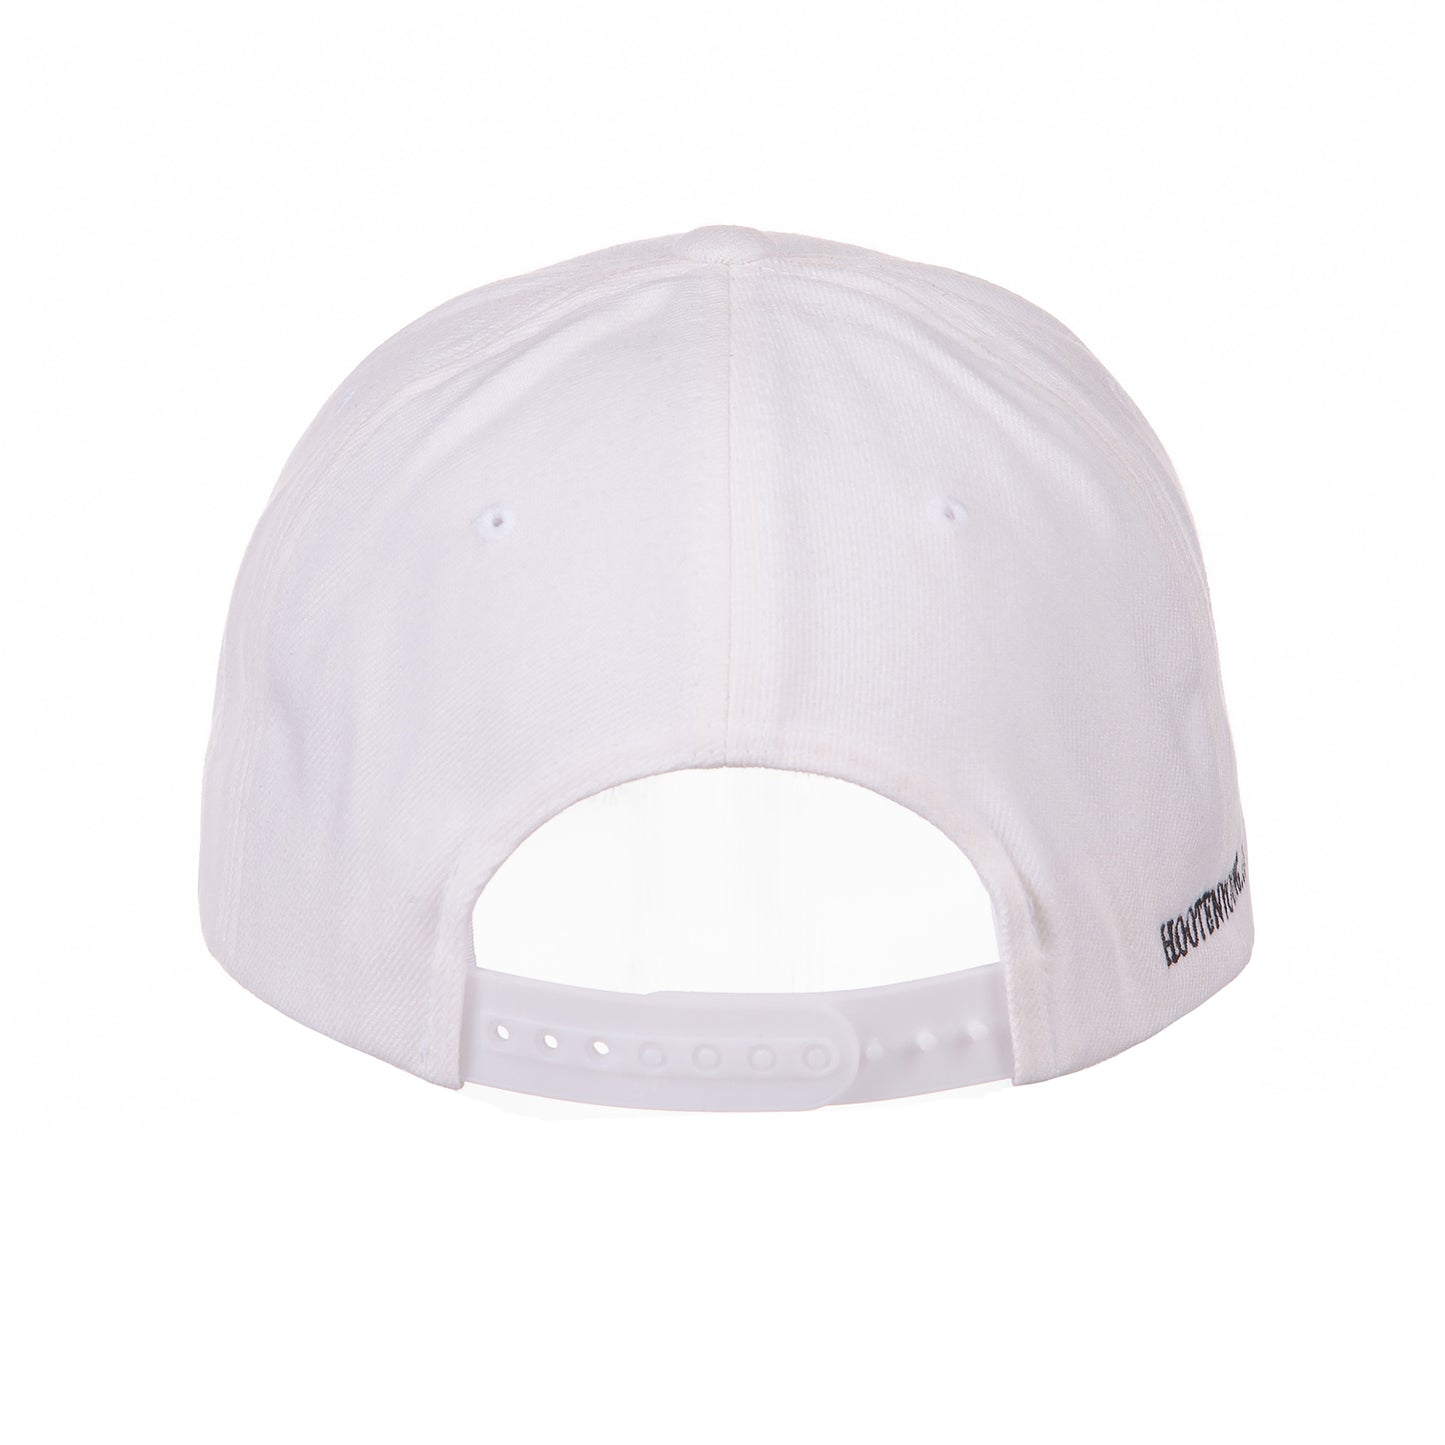 rear view of white hat